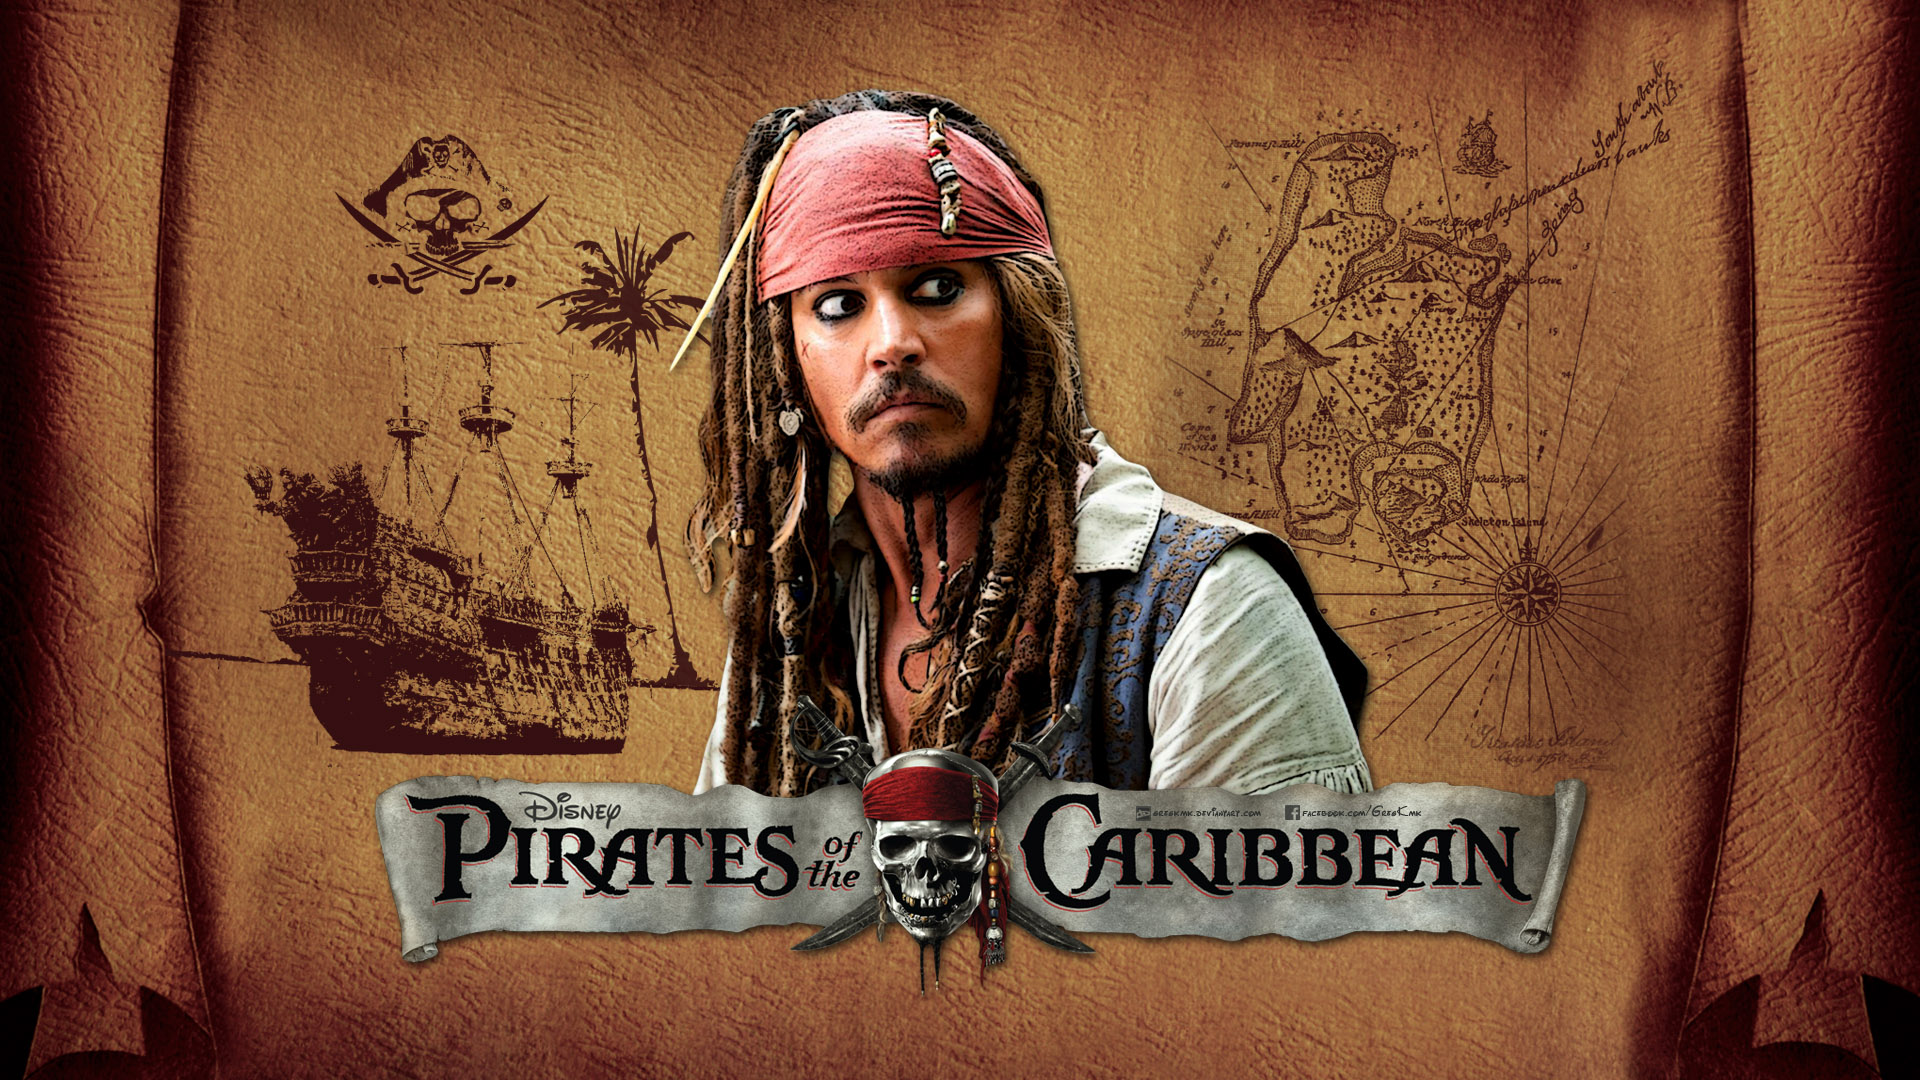 Movie Pirates Of The Caribbean HD Wallpaper | Background Image